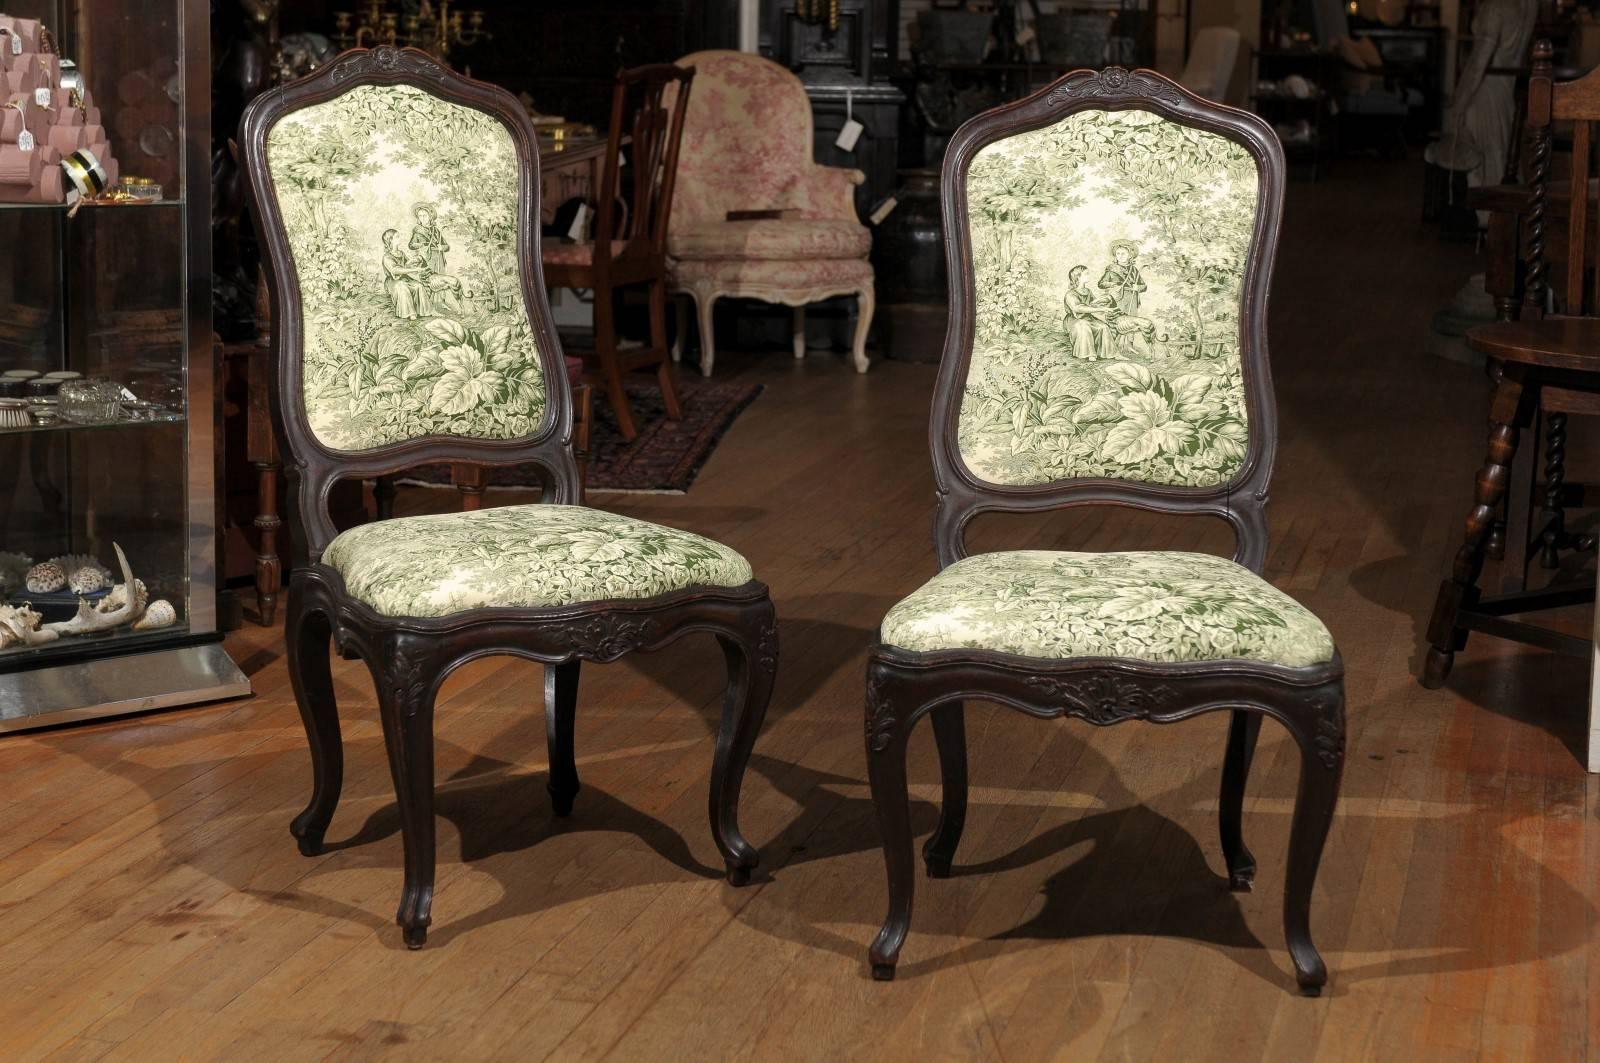 Early 20th century French provencal pair of side chairs carved of oak in the Louis XV style and newly upholstered in an ivory and green toile.